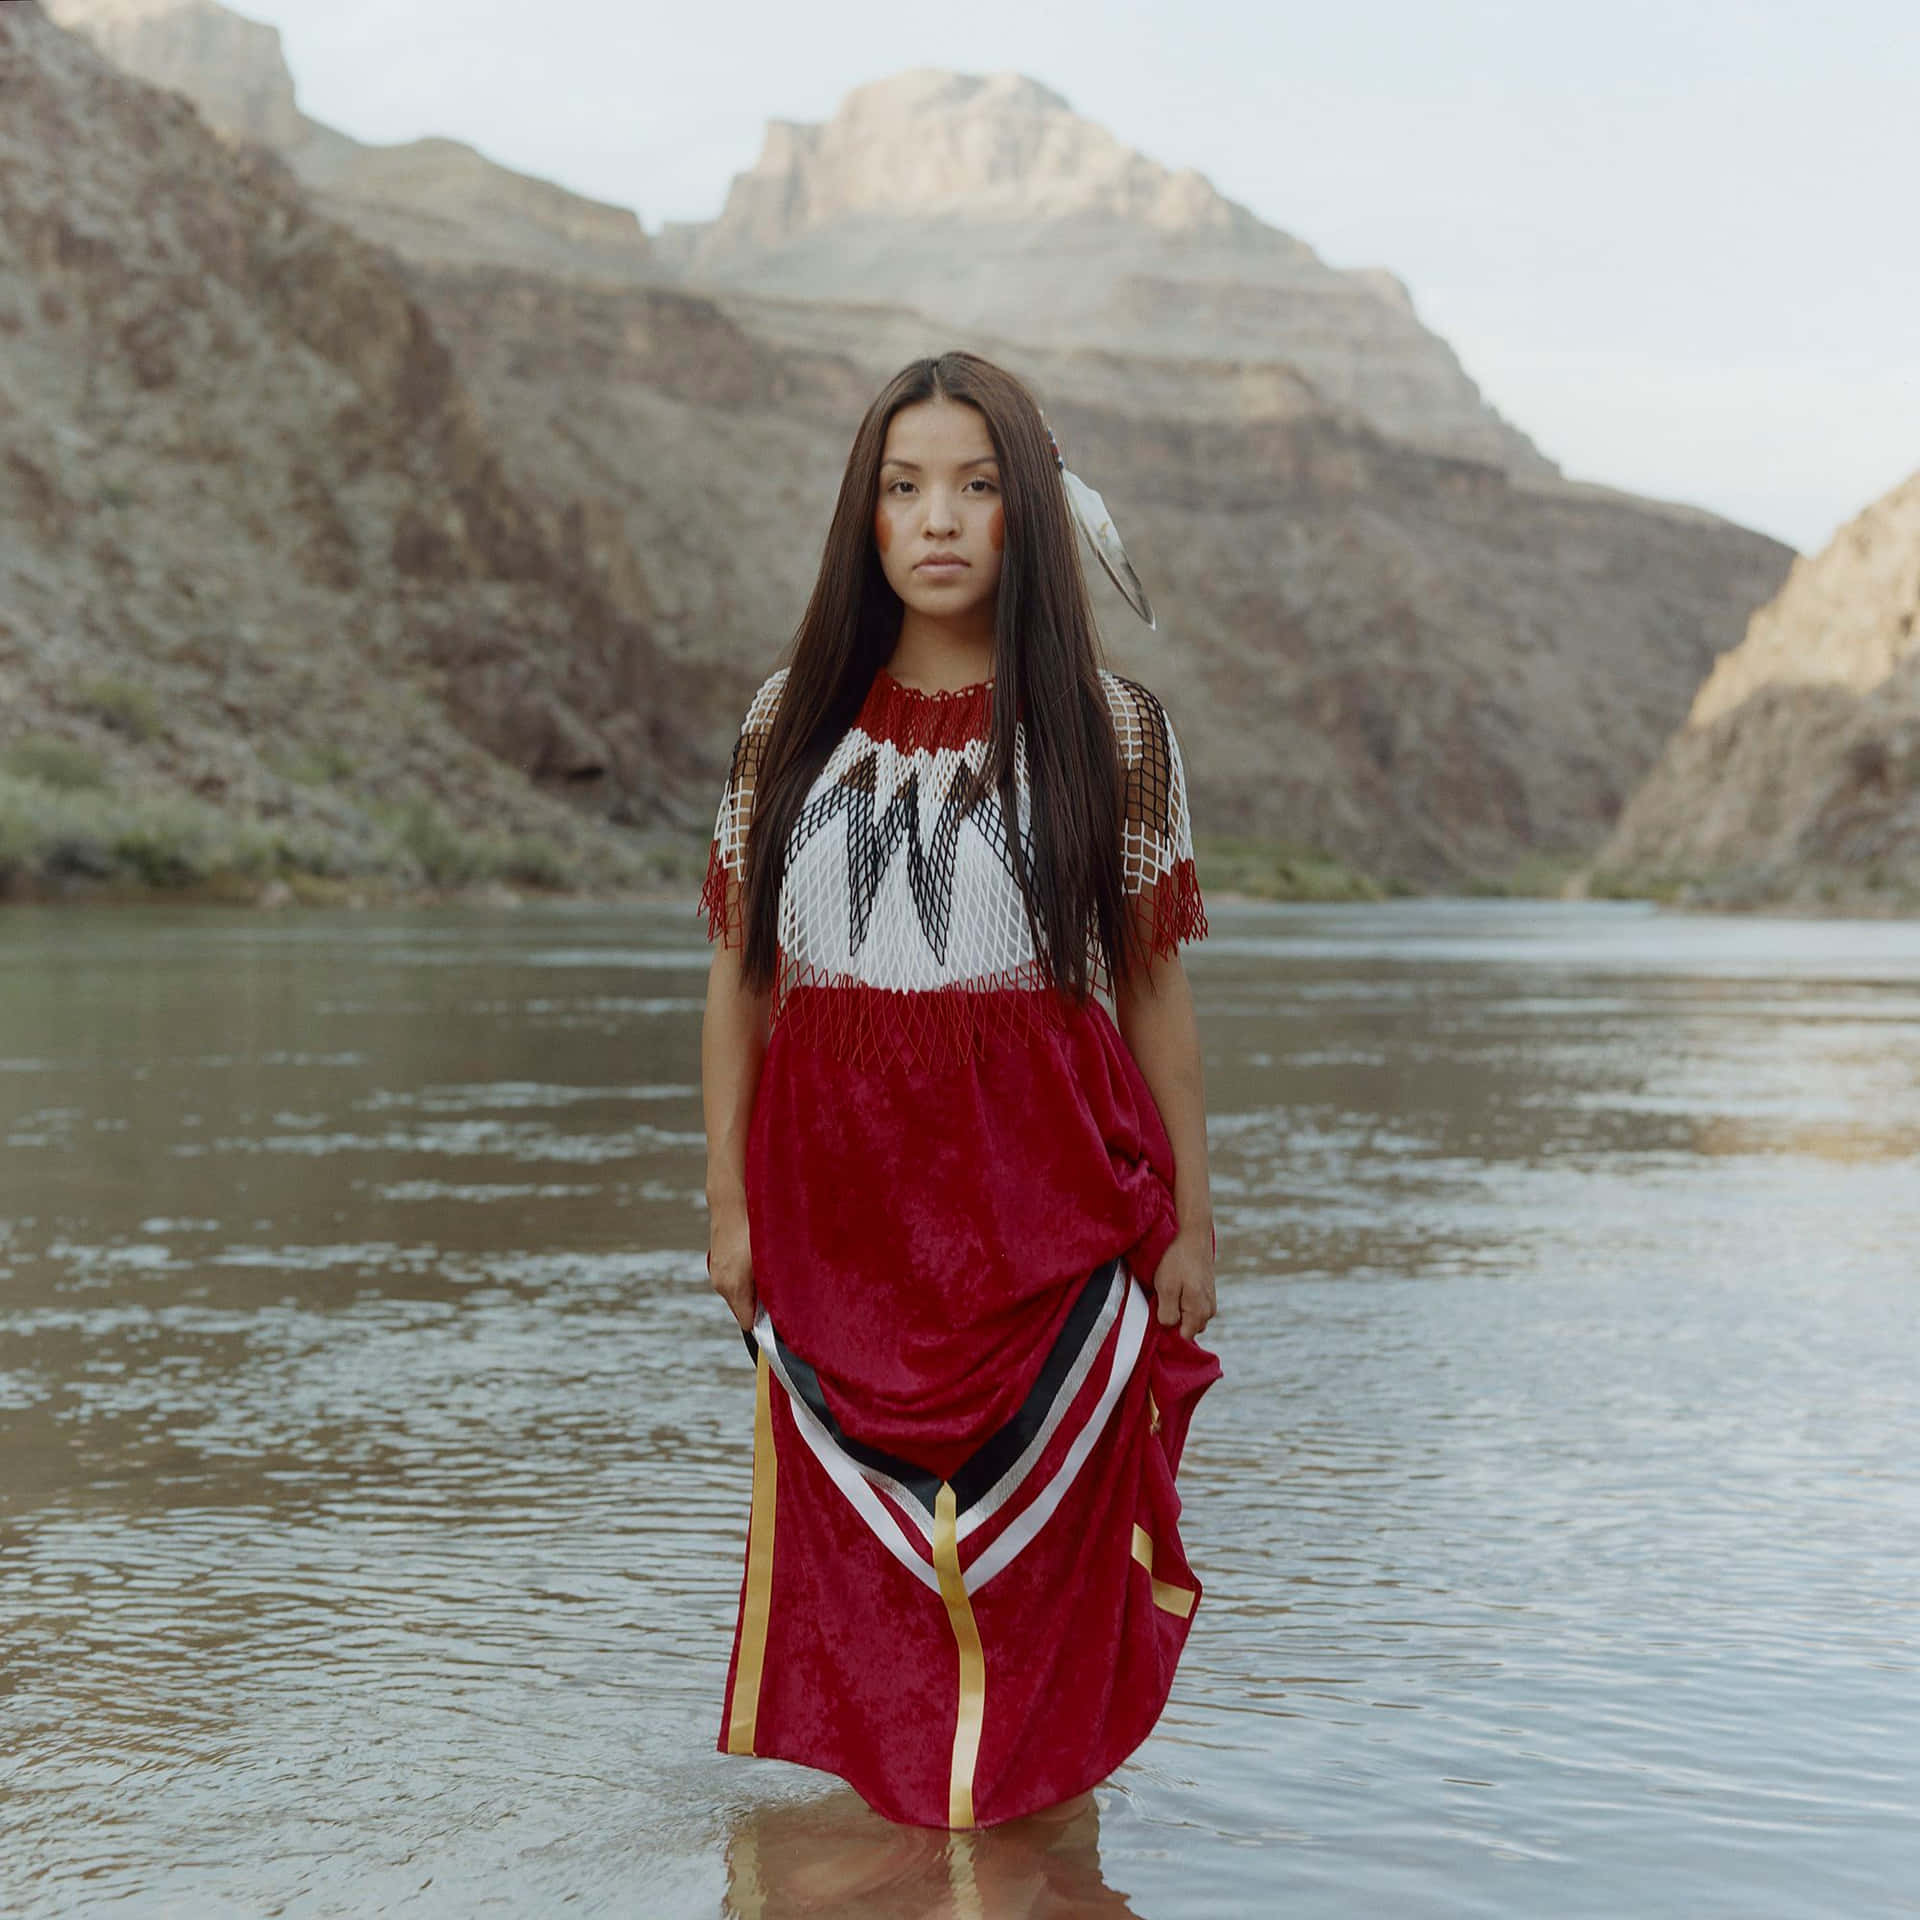 Lake Native American Woman Pictures